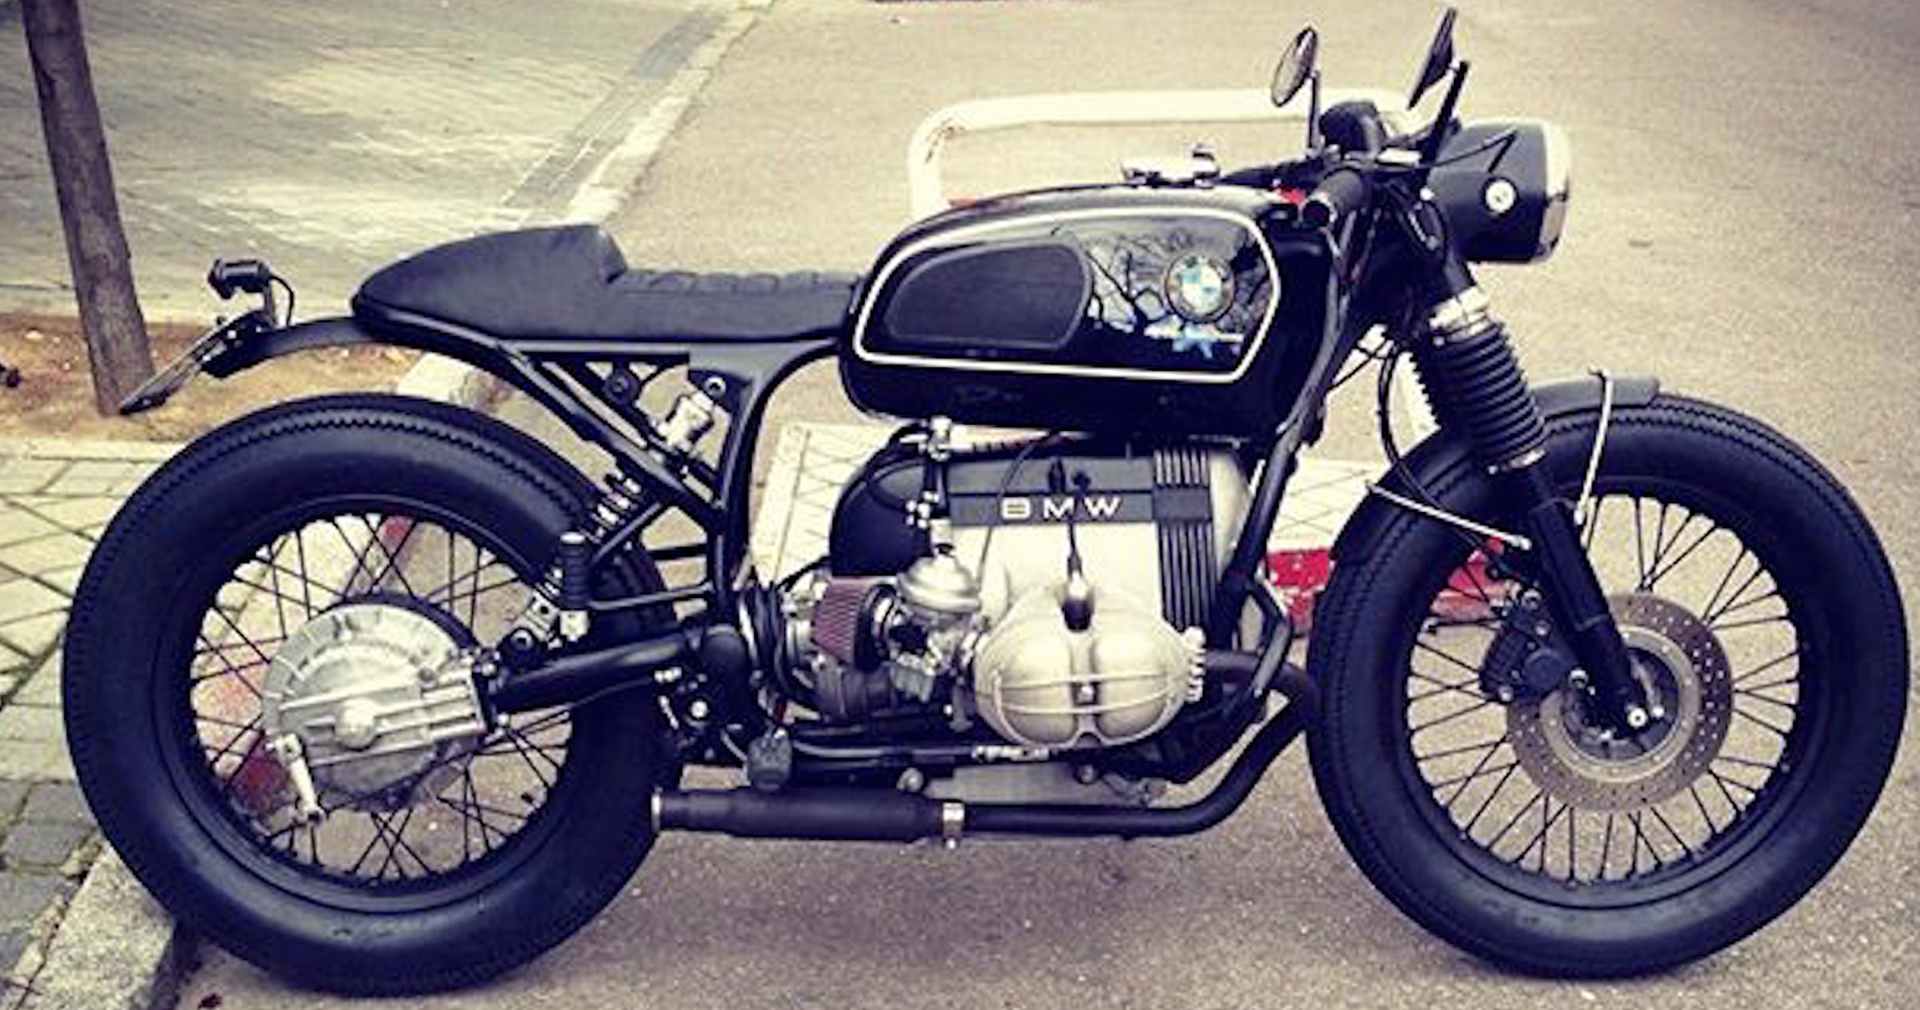 Bmw Cafe Racer R80 - Wallpaperall